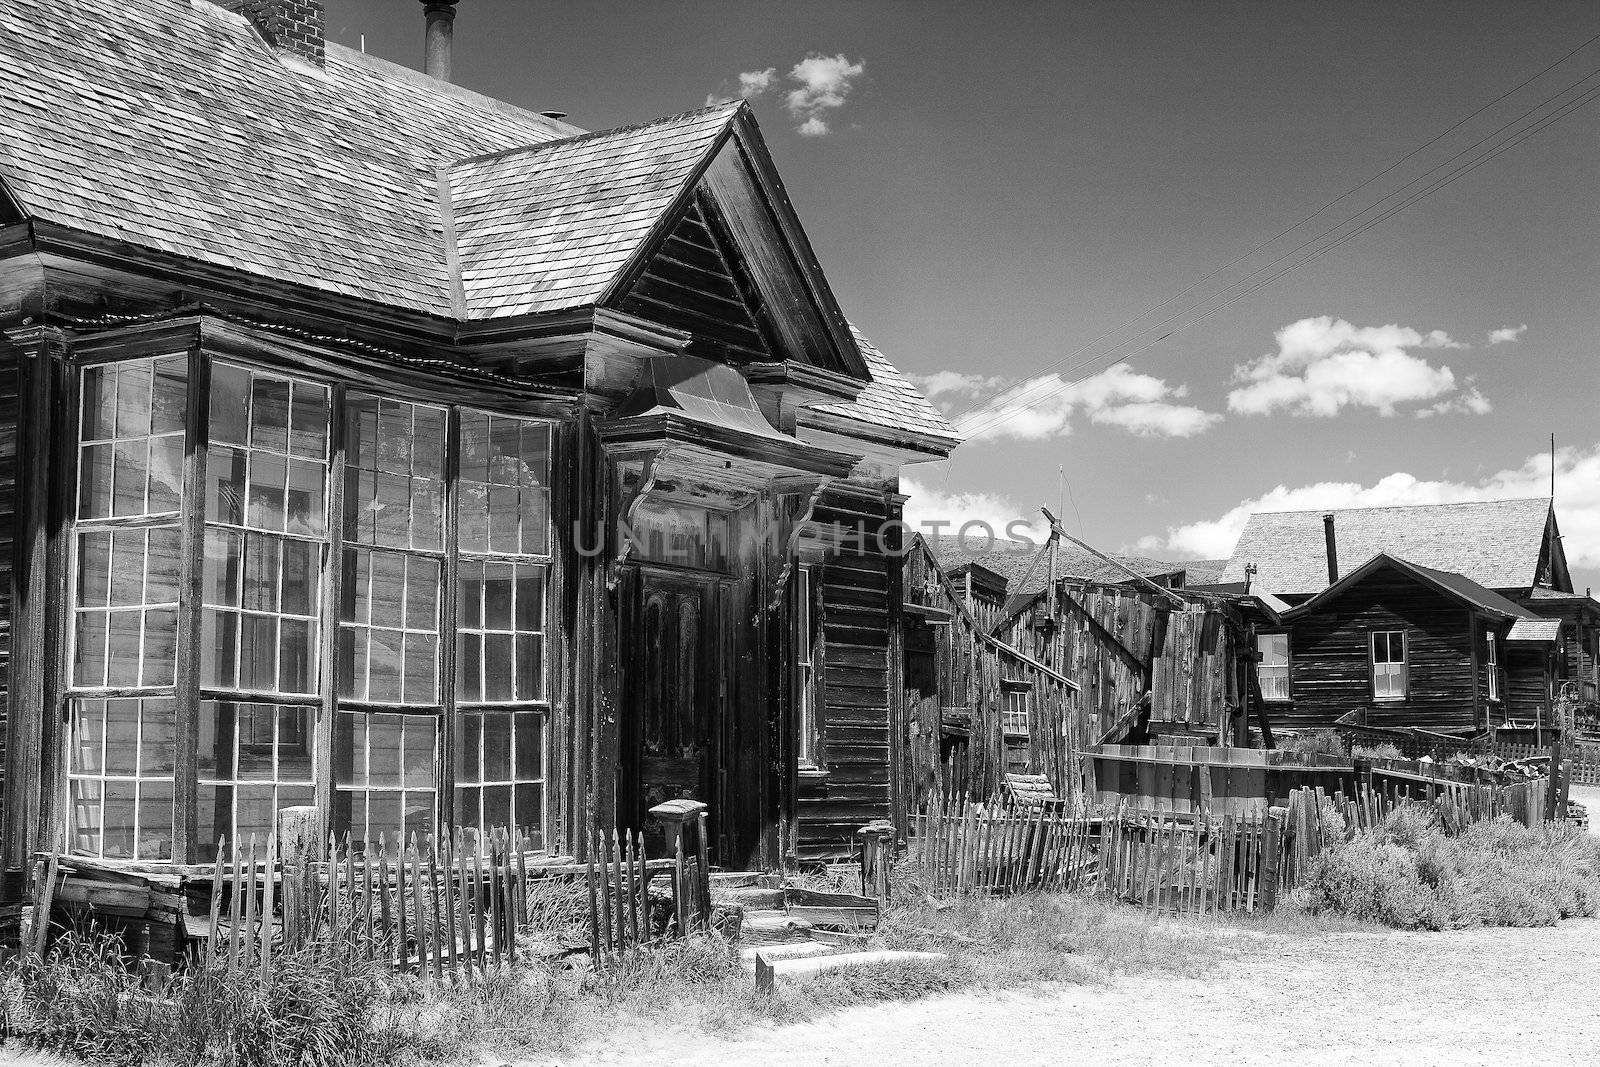 Old buildings in Bodie, an original ghost town from the late 1800s